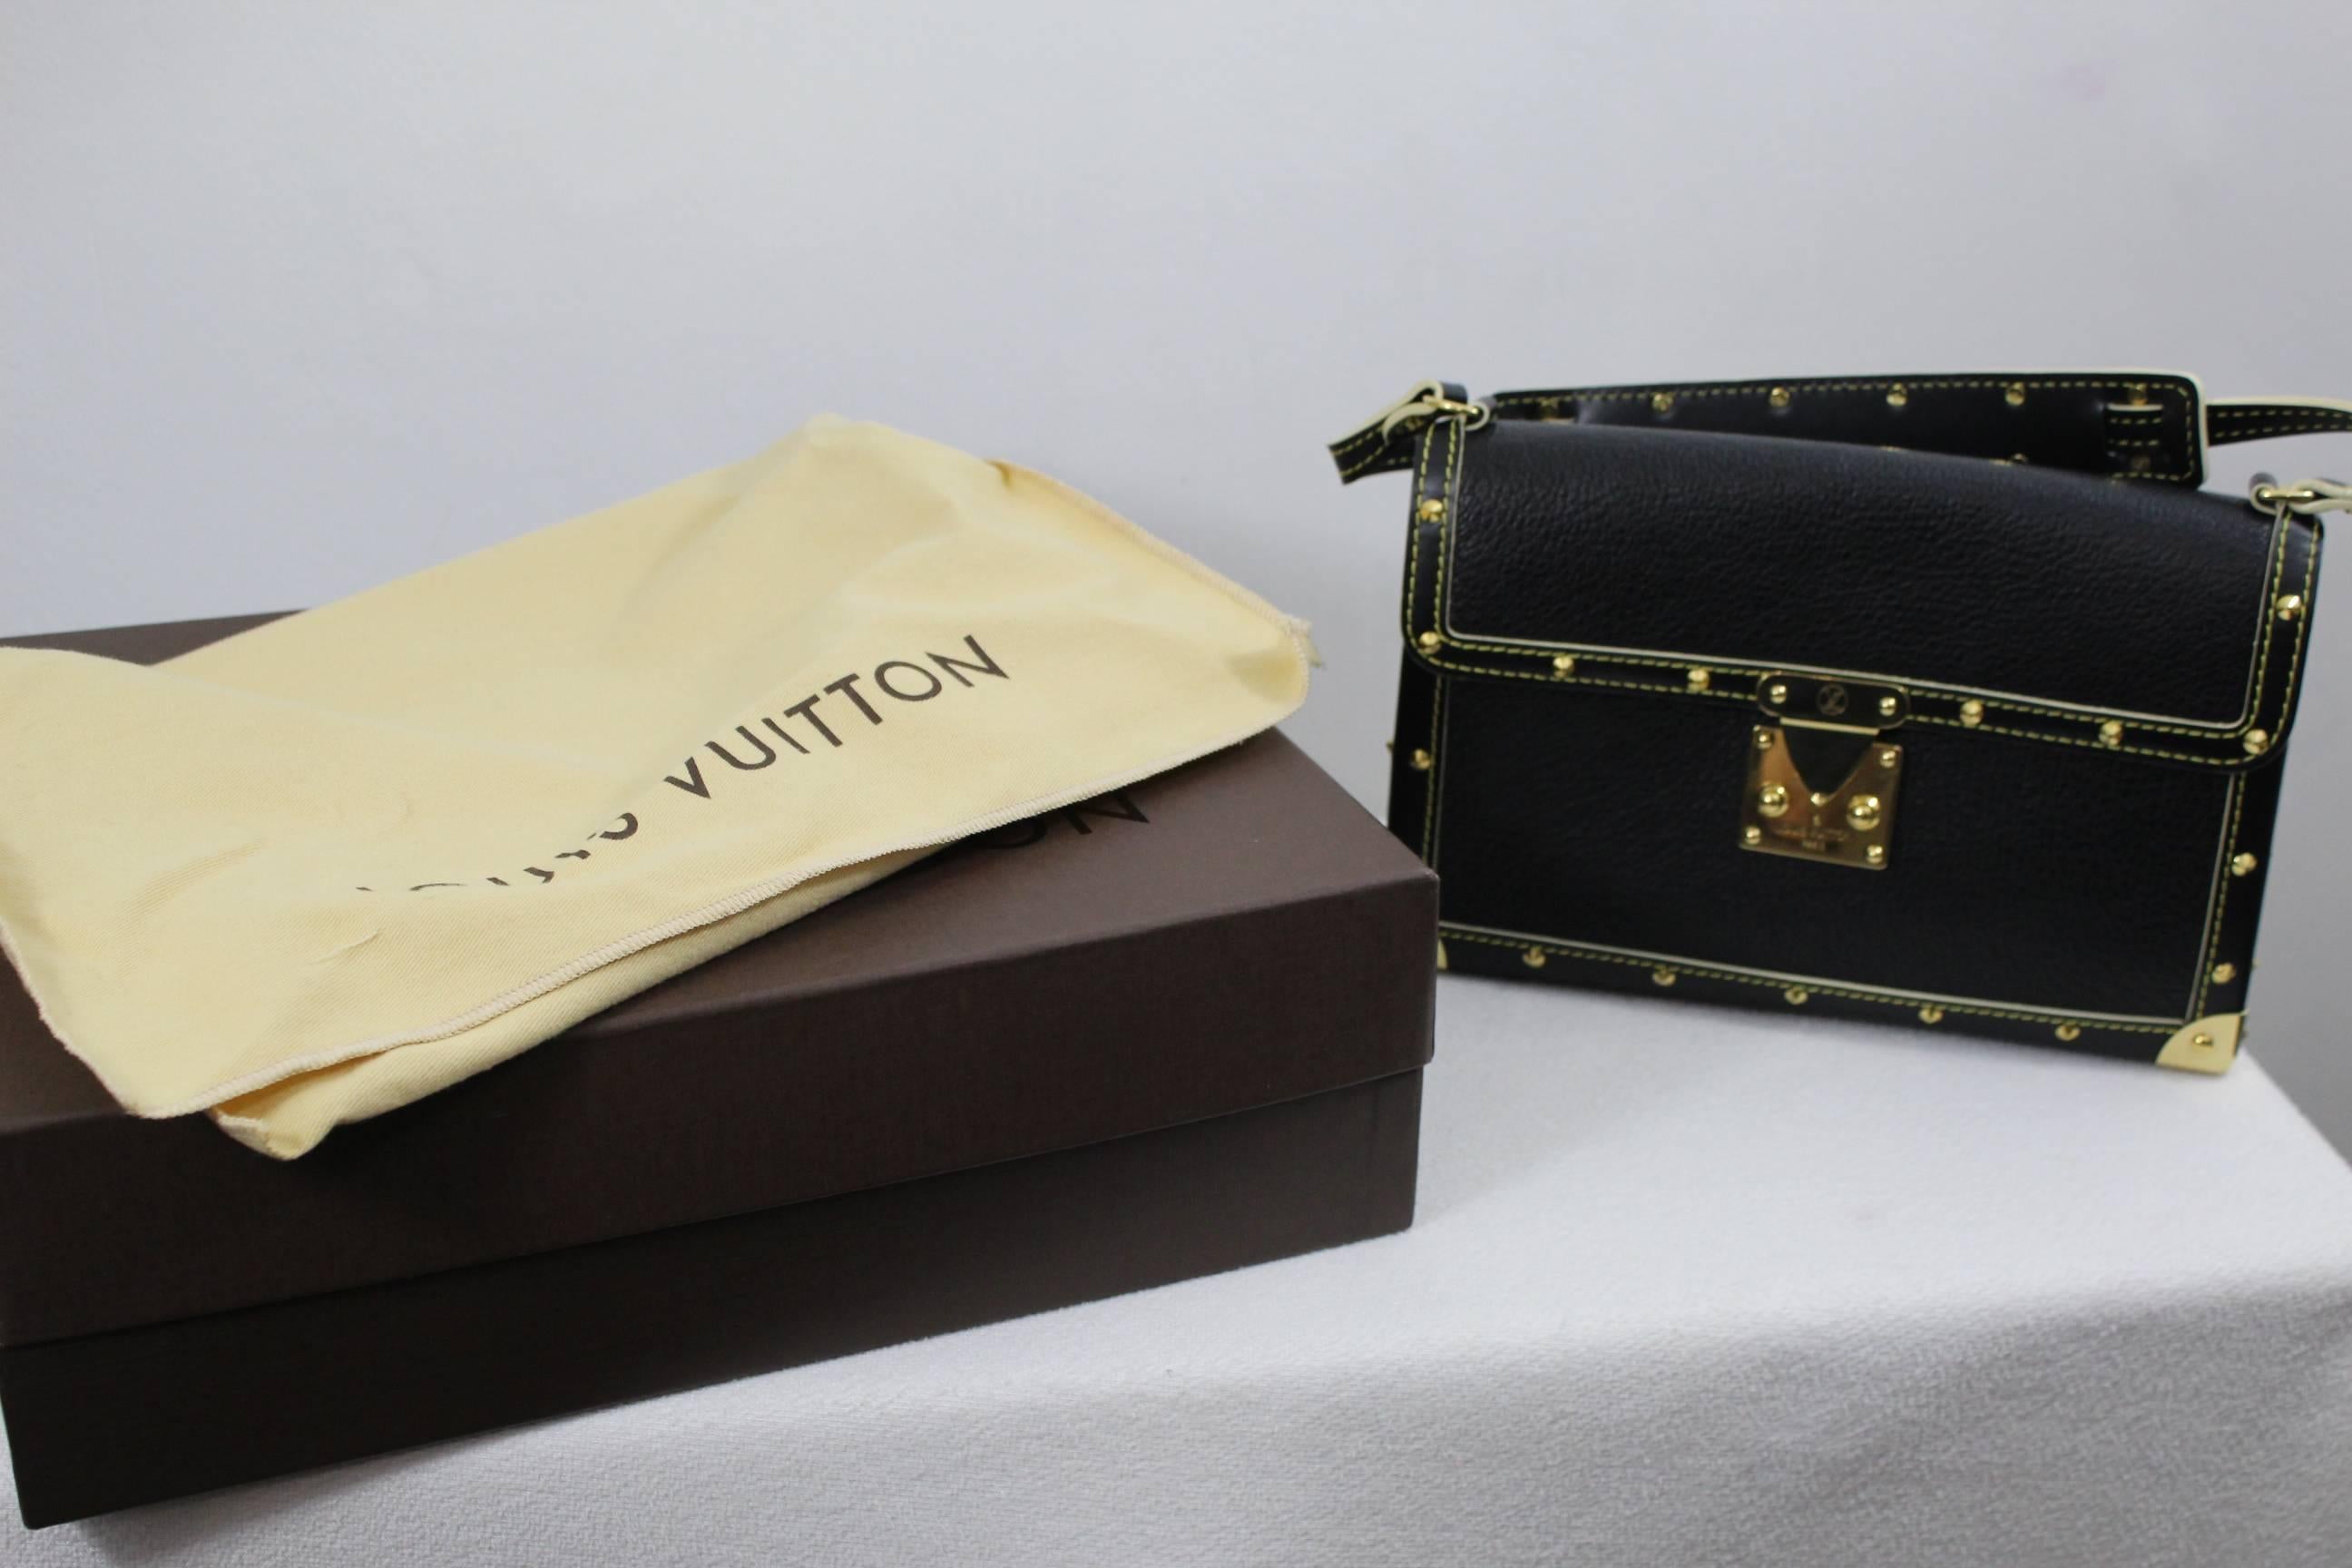 Awesome Louis Vuitton bag limited edition in 2006 in grained leather and golden hardware.

Really good condtion just some small signs of wear.

Sold with box and dust bag

Size: 8,5 x5,7 inches